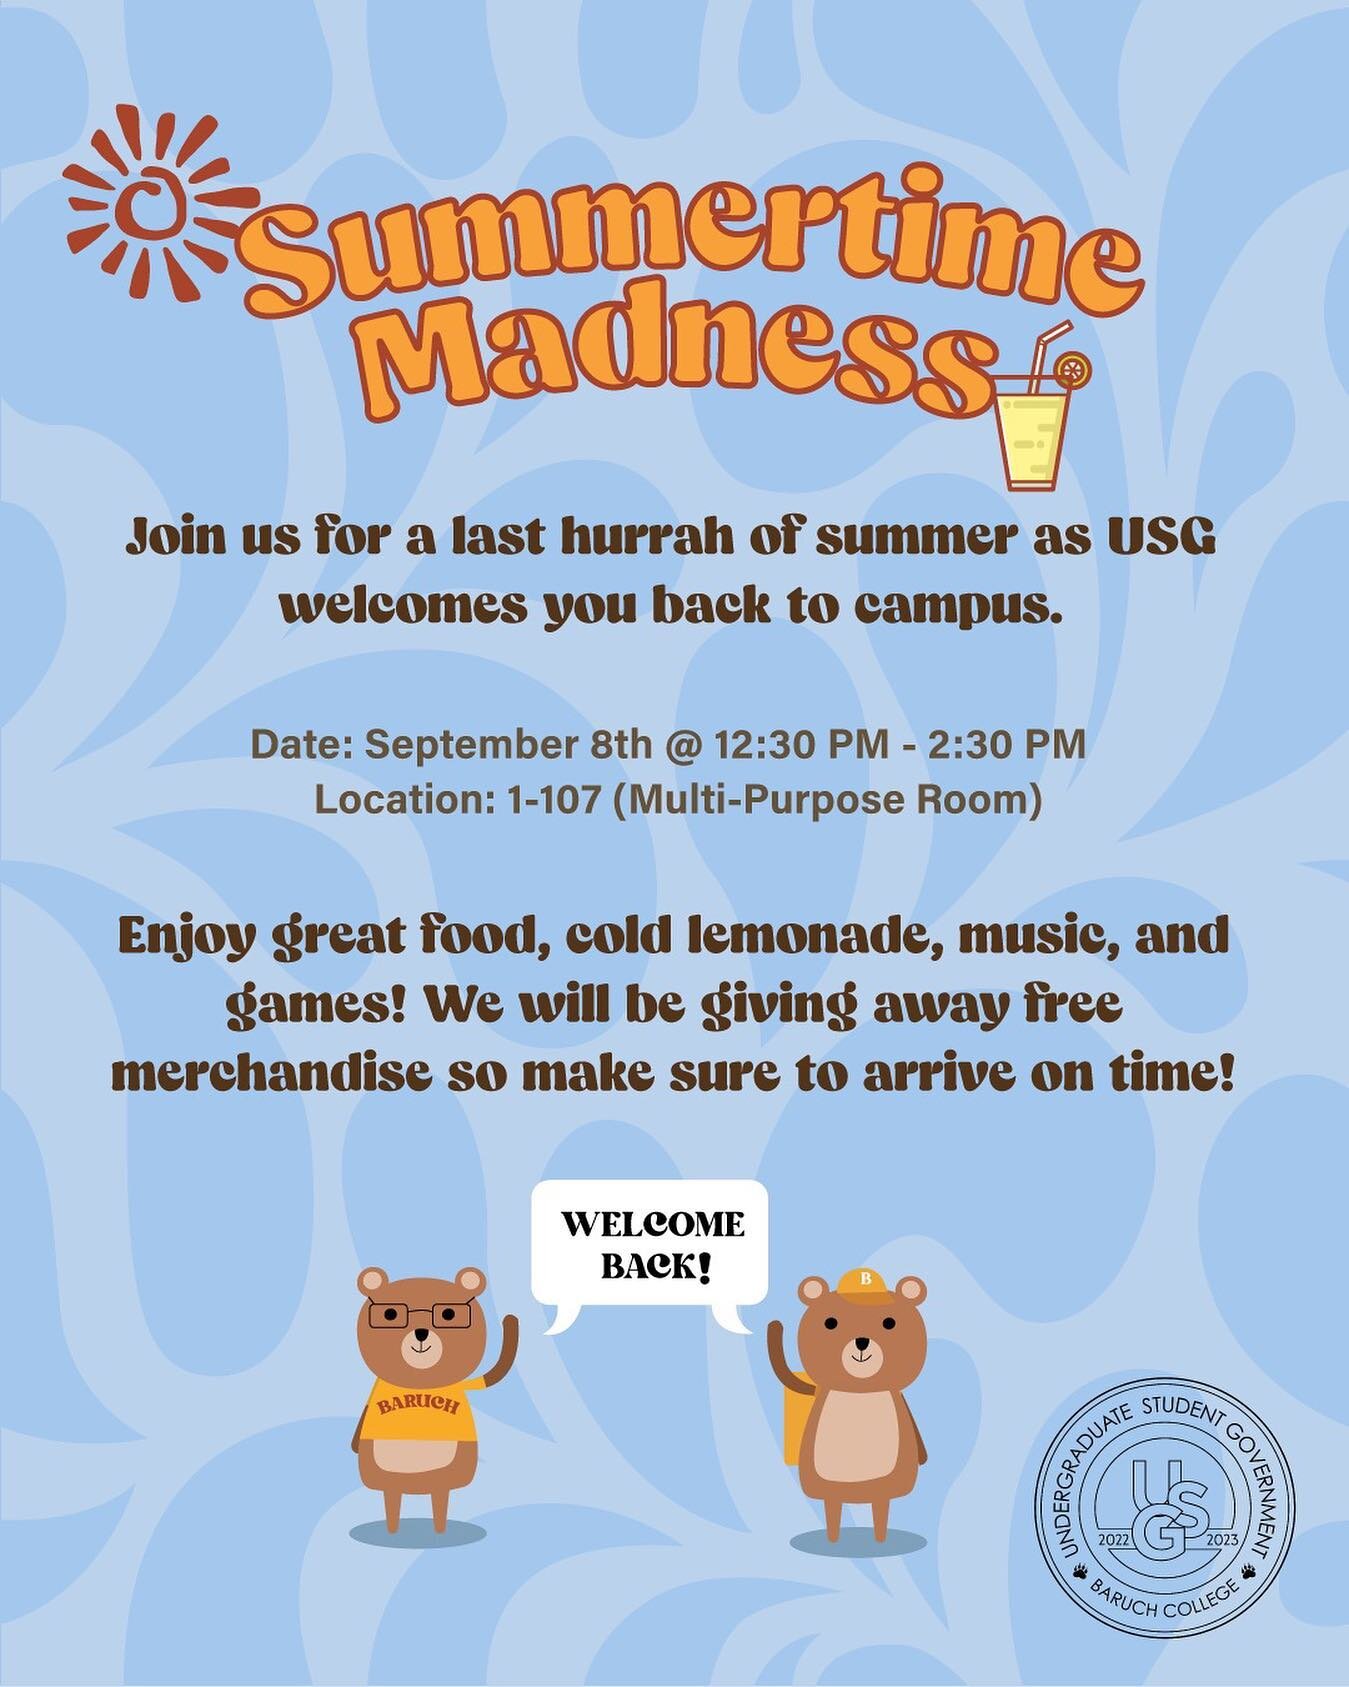 DRUM ROLL PLEASE 🥁 OUR LAST AND FINAL WELCOME WEEK EVENT IS HERE 🎉 
Come for a fun filled event with merch, games, food, and more, to end your summer in the perfect way! This Thursday, September 8th at 12:30-2:30 PM!